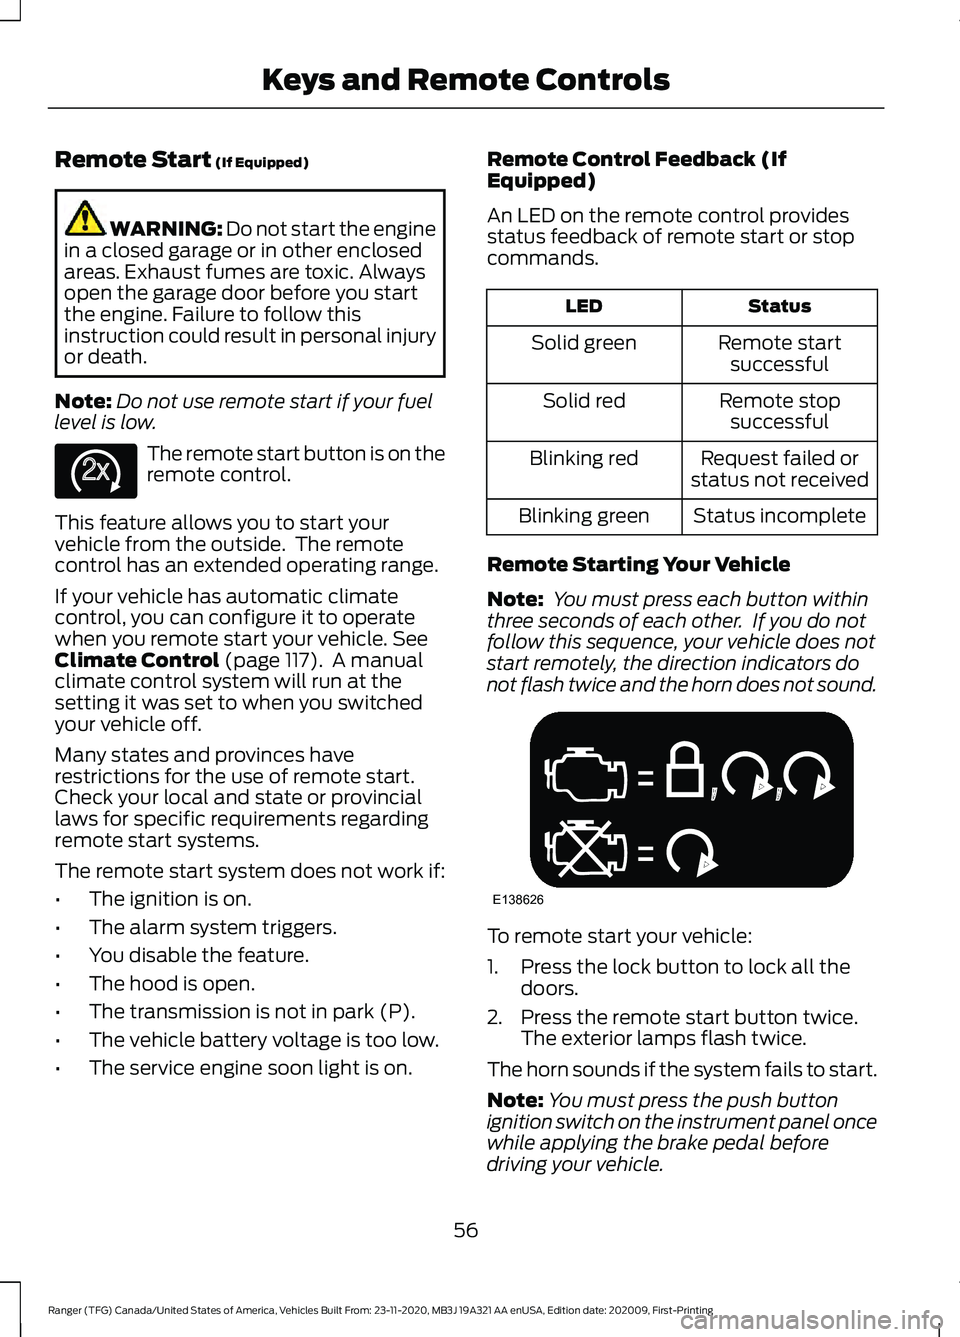 FORD RANGER 2021  Owners Manual Remote Start (If Equipped)
WARNING: Do not start the engine
in a closed garage or in other enclosed
areas. Exhaust fumes are toxic. Always
open the garage door before you start
the engine. Failure to 